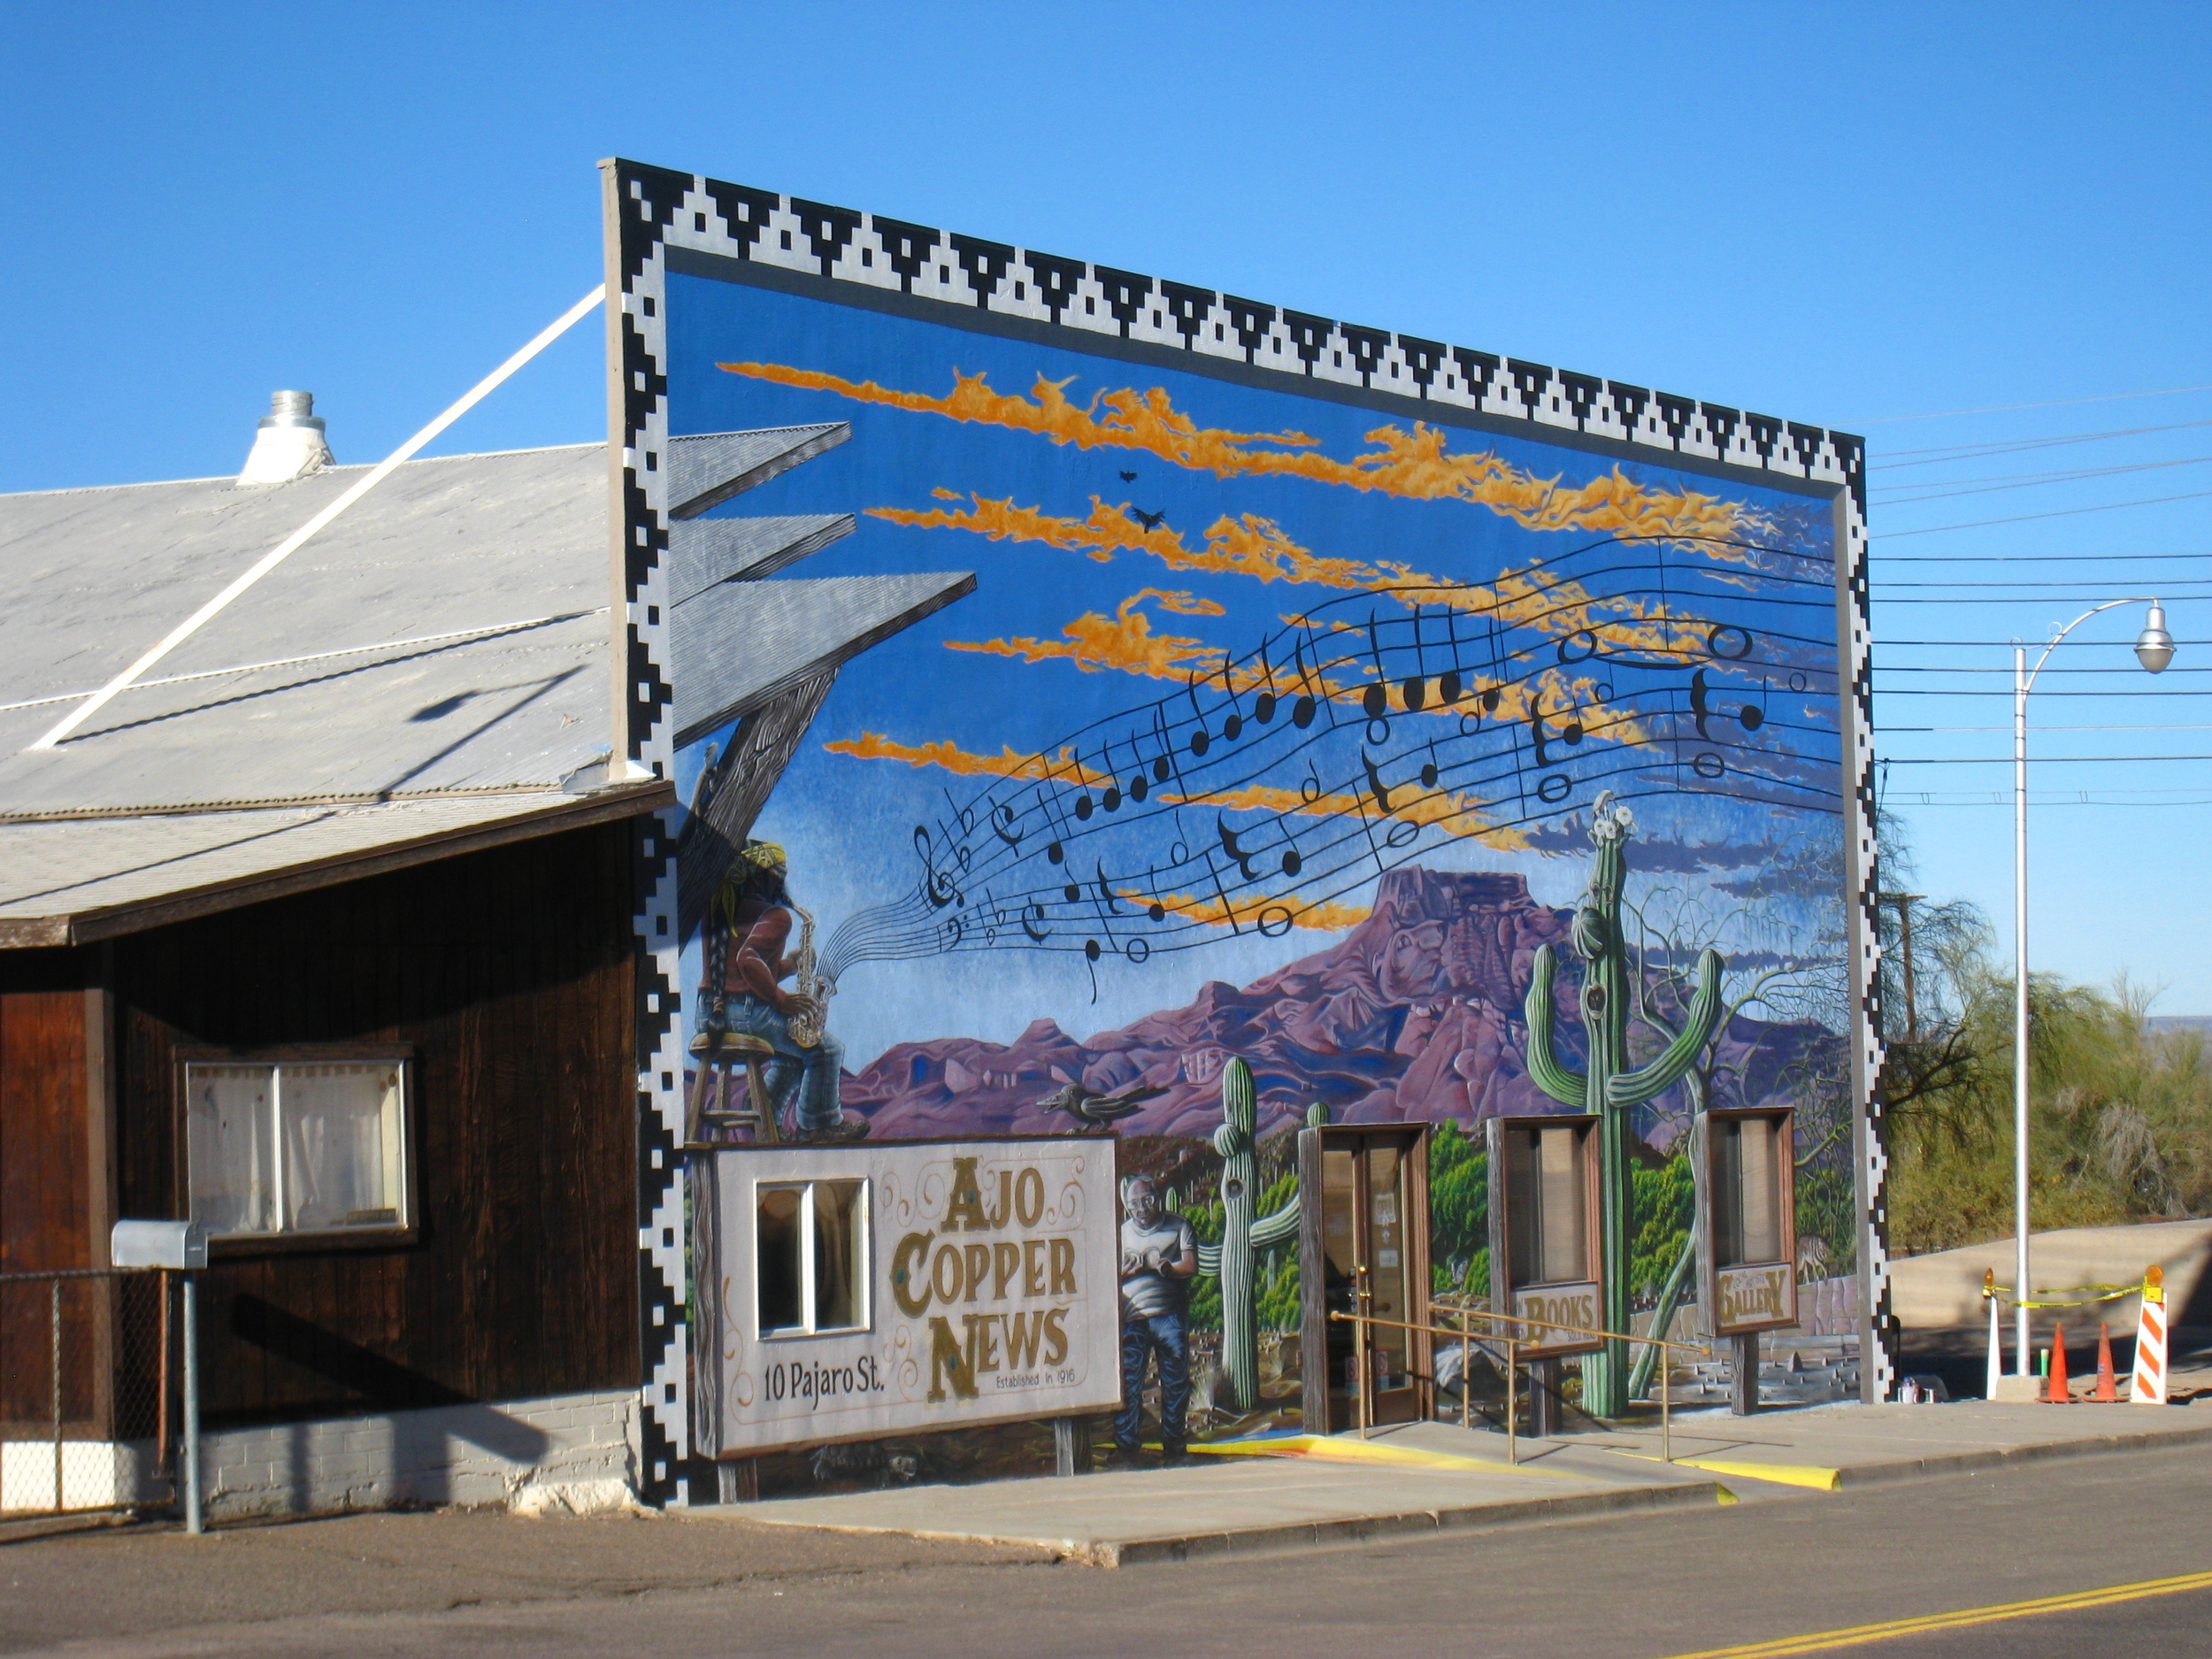 The Ajo Copper News building